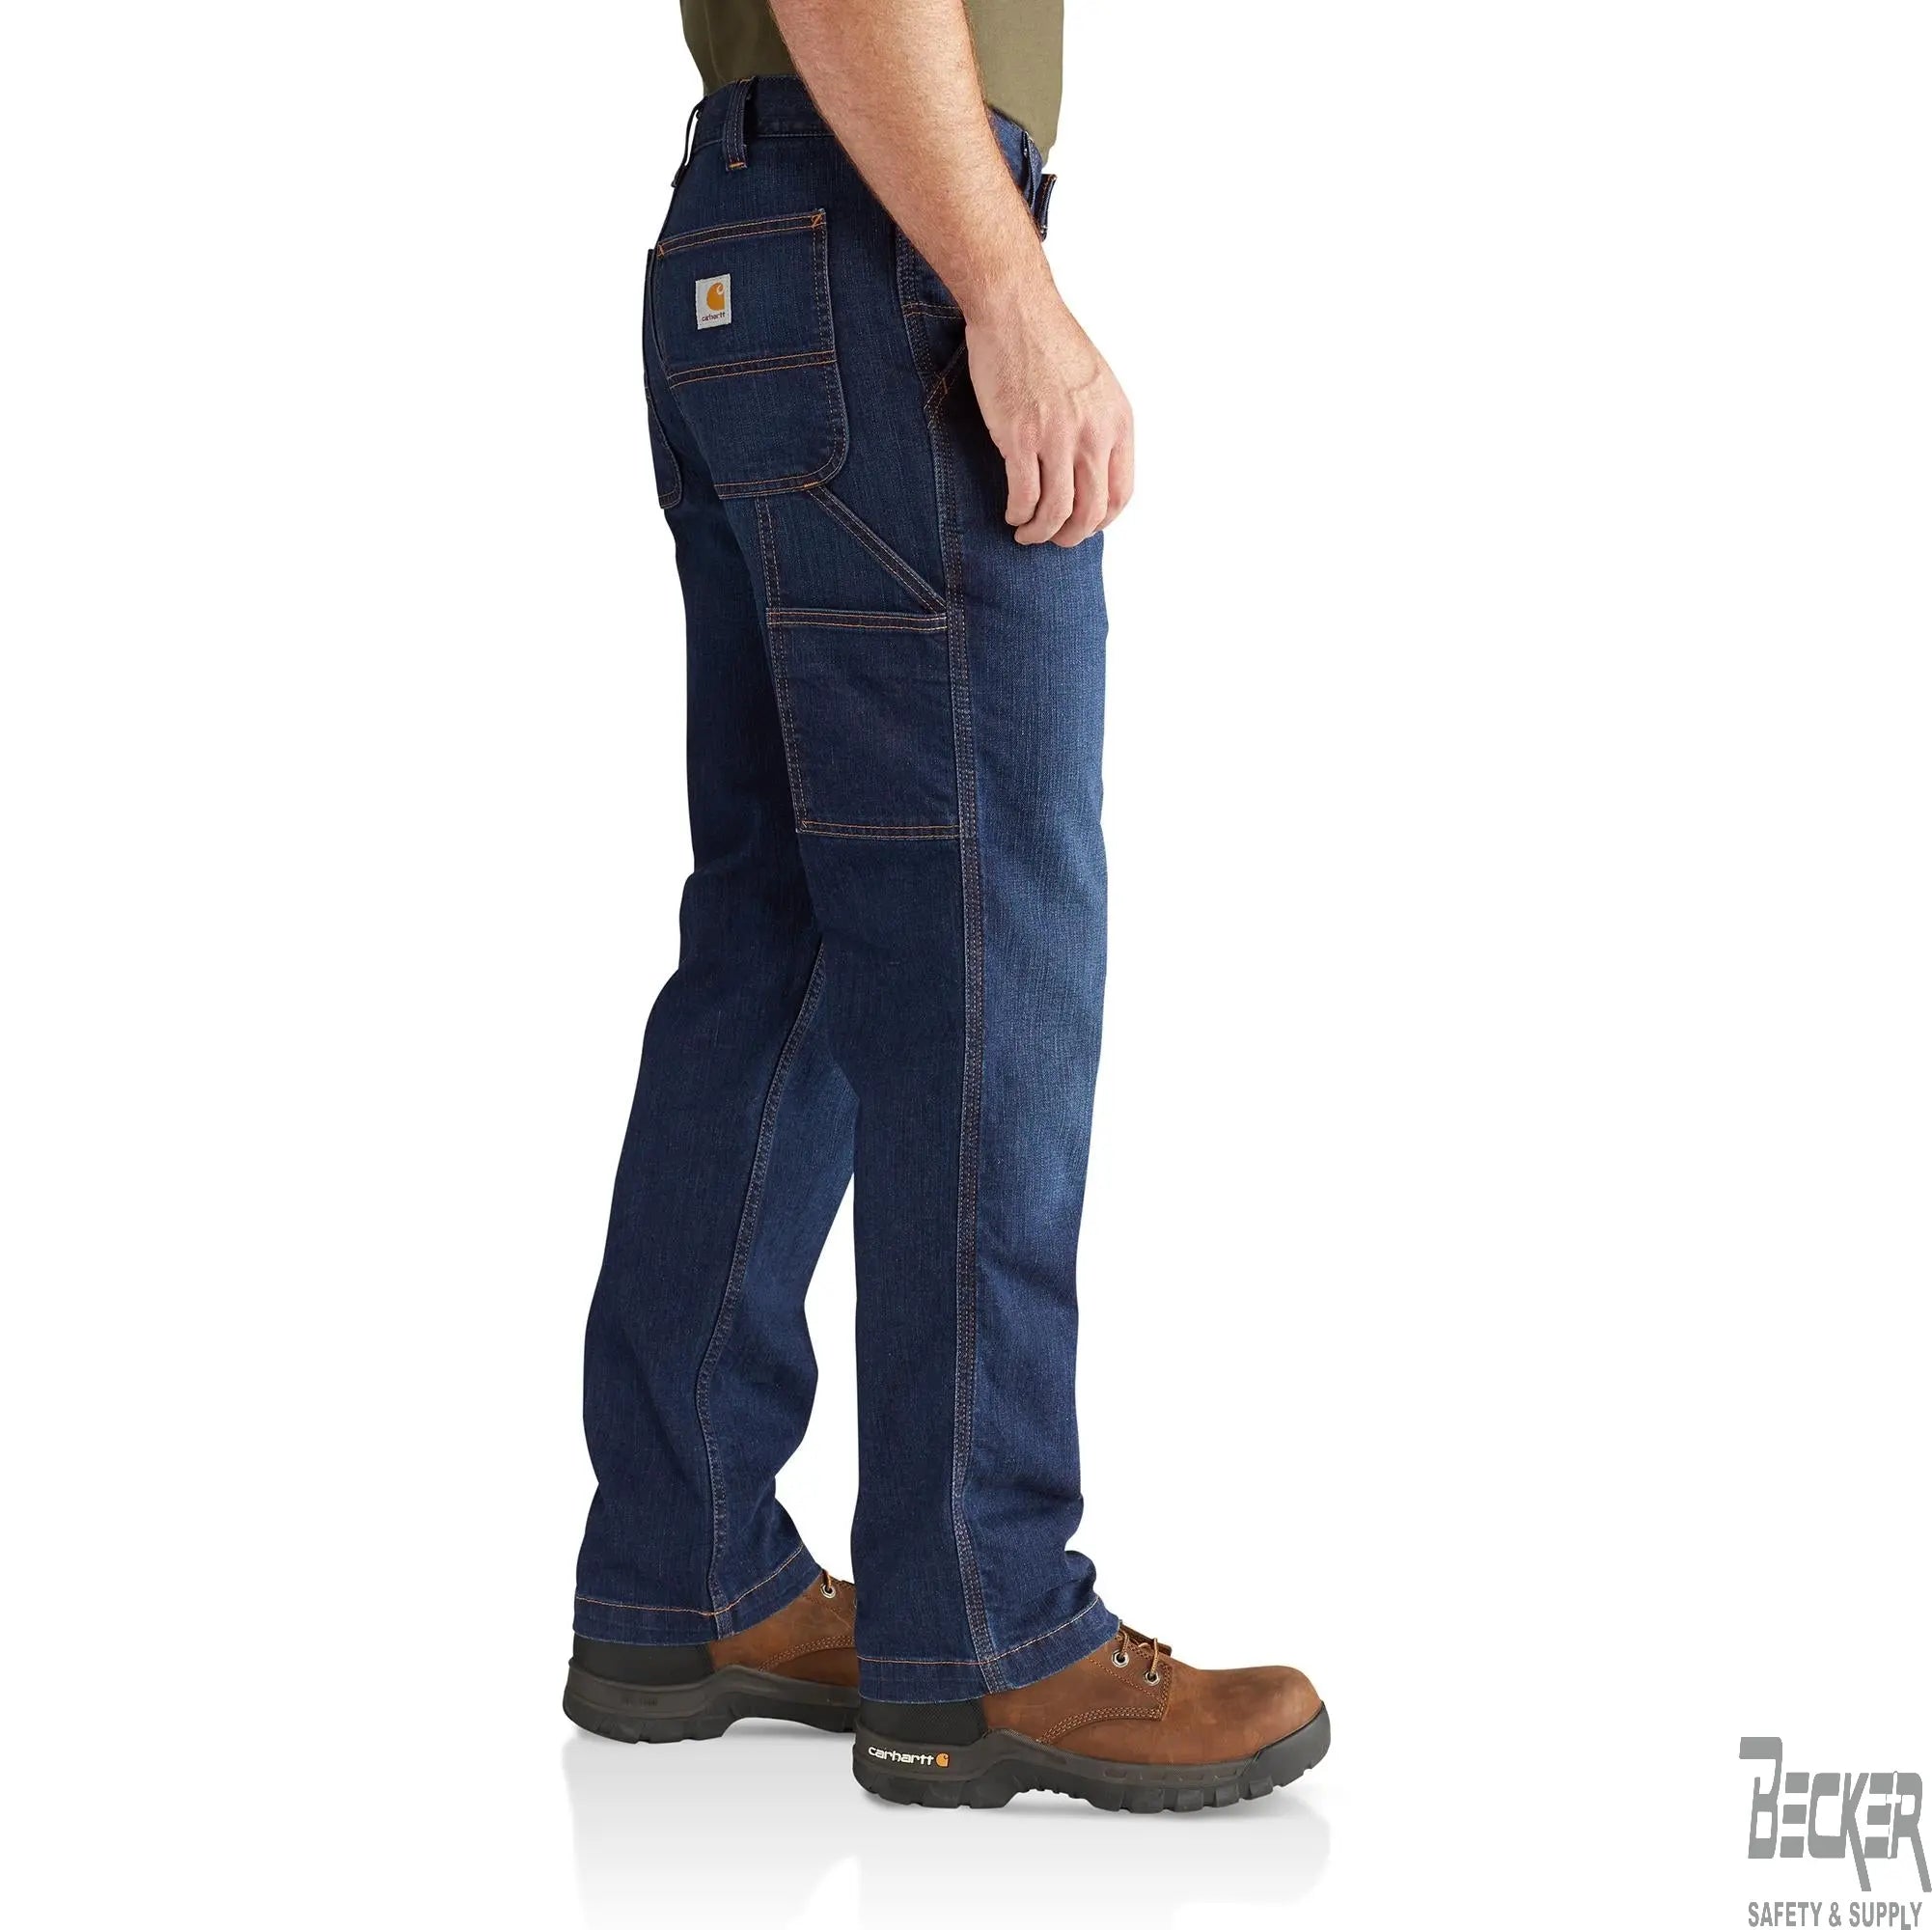 CARHARTT - Rugged Flex Relaxed Fit 5-Pocket Jean - Becker Safety and Supply